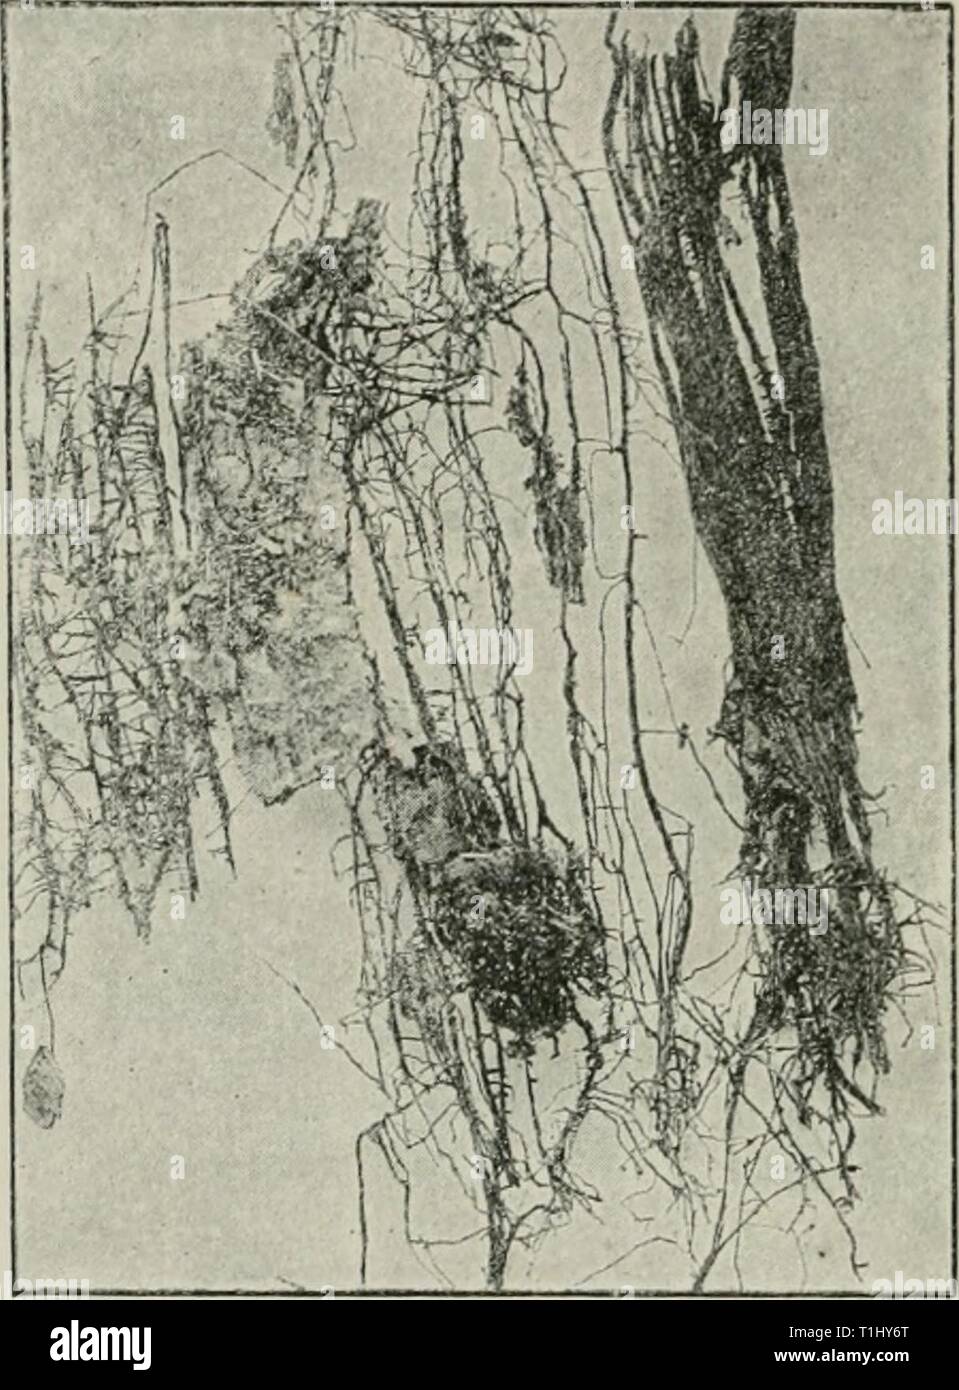 Diseases of plants induced by Diseases of plants induced by cryptogamic parasites; introduction to the study of pathogenic Fungi, slime-Fungi, bacteria, & Algae  diseasesofplant00tube Year: 1897  458 BASIDIOMYCETES. point, whereby a felted tissue, called the medulla, is produced in the interior. The outer parts of the pseudoparenchyma, on the other hand, coalesce to form the so-called rind, which when young gives off numerous delicate hyphae, and these, taking advantage of the medullary rays, penetrate the wood, and especially the resin-ducts, should such be present. In the wood the growth is  Stock Photo